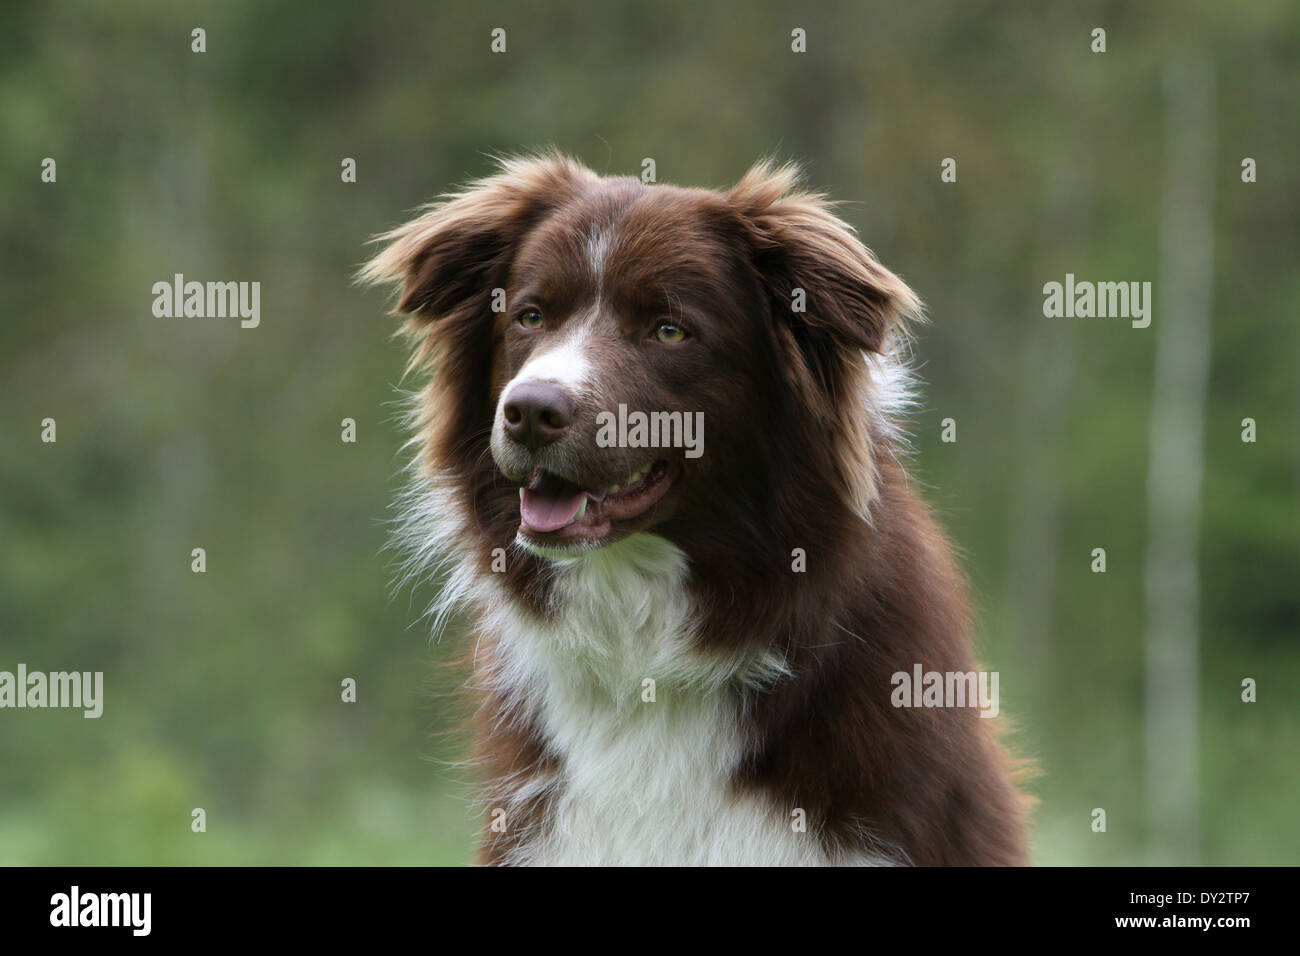 Dog Border Collie adult red and white portrait Stock Photo